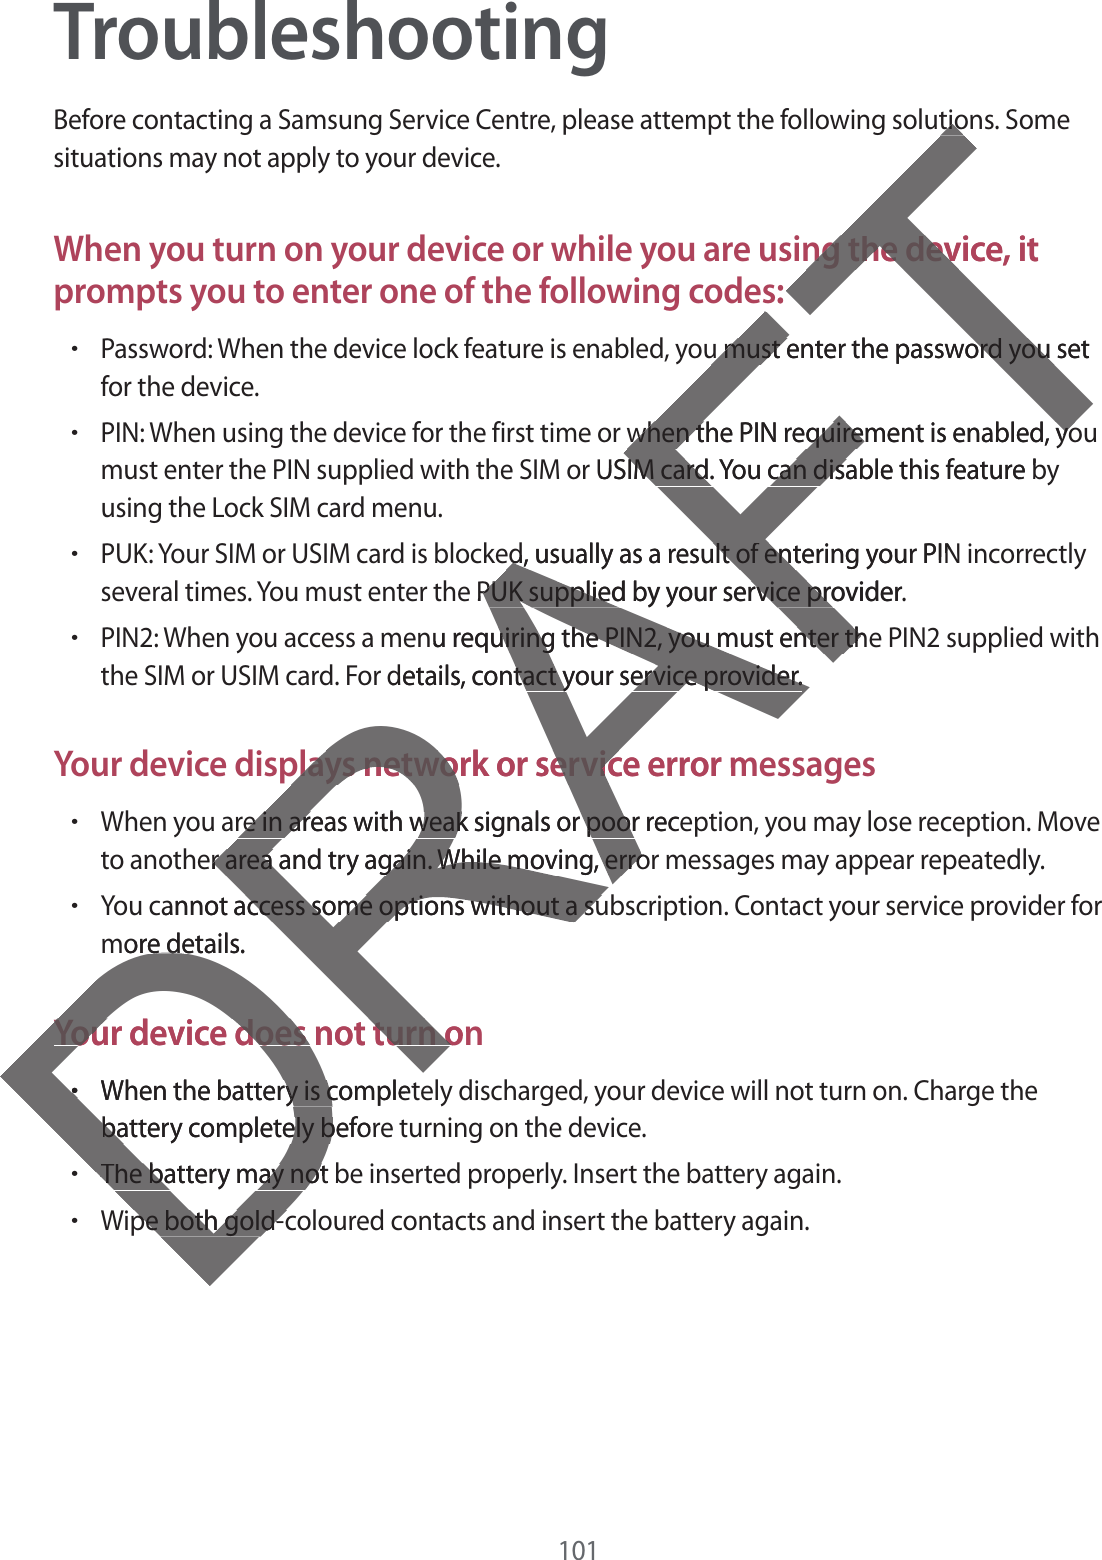 101TroubleshootingBefore contacting a Samsung Service Centre, please attempt the following solutions. Some situations may not apply to your device.When you turn on your device or while you are using the device, it prompts you to enter one of the following codes:rPassword: When the device lock feature is enabled, you must enter the password you setfor the device.rPIN: When using the device for the first time or when the PIN requirement is enabled, youmust enter the PIN supplied with the SIM or USIM card. You can disable this feature byusing the Lock SIM card menu.rPUK: Your SIM or USIM card is blocked, usually as a result of entering your PIN incorrectlyseveral times. You must enter the PUK supplied by your service provider.rPIN2: When you access a menu requiring the PIN2, you must enter the PIN2 supplied withthe SIM or USIM card. For details, contact your service provider.Your device displays network or service error messagesrWhen you are in areas with weak signals or poor reception, you may lose reception. Moveto another area and try again. While moving, error messages may appear repeatedly.rYou cannot access some options without a subscription. Contact your service provider formore details.Your device does not turn onrWhen the battery is completely discharged, your device will not turn on. Charge thebattery completely before turning on the device.rThe battery may not be inserted properly. Insert the battery again.rWipe both gold-coloured contacts and insert the battery again.DRAFTtiotiong the device, it ng the devs:u must enter the password you setu must enter the password you when the PIN requirement is enabled, yowhen the PIN requirement is enabled, yor USIM card. You can disable this feature bIM card. You can disaed, usually as a result of entering your PINed, usually as a result of ente PUK supplied by your service provider.PUK supplied by your service pronu requiring the PIN2, you must enter theuiring the PIN2, you must enter thdetails, contact your service provider.tact your service provider.plays network or service error mplays network or servicre in areas with weak signals or poor recere in areas with weak signals or poorer area and try again. While moving, error area and try again. While moving, errocannot access some options without a suaccess some options without a suore details.e deYour device does not turn onYour device does not turn orrWhen the battery is completry is cbattery completely beforbattery completely bThe battery may not The battery may notpe both gold-cpe both gold-c